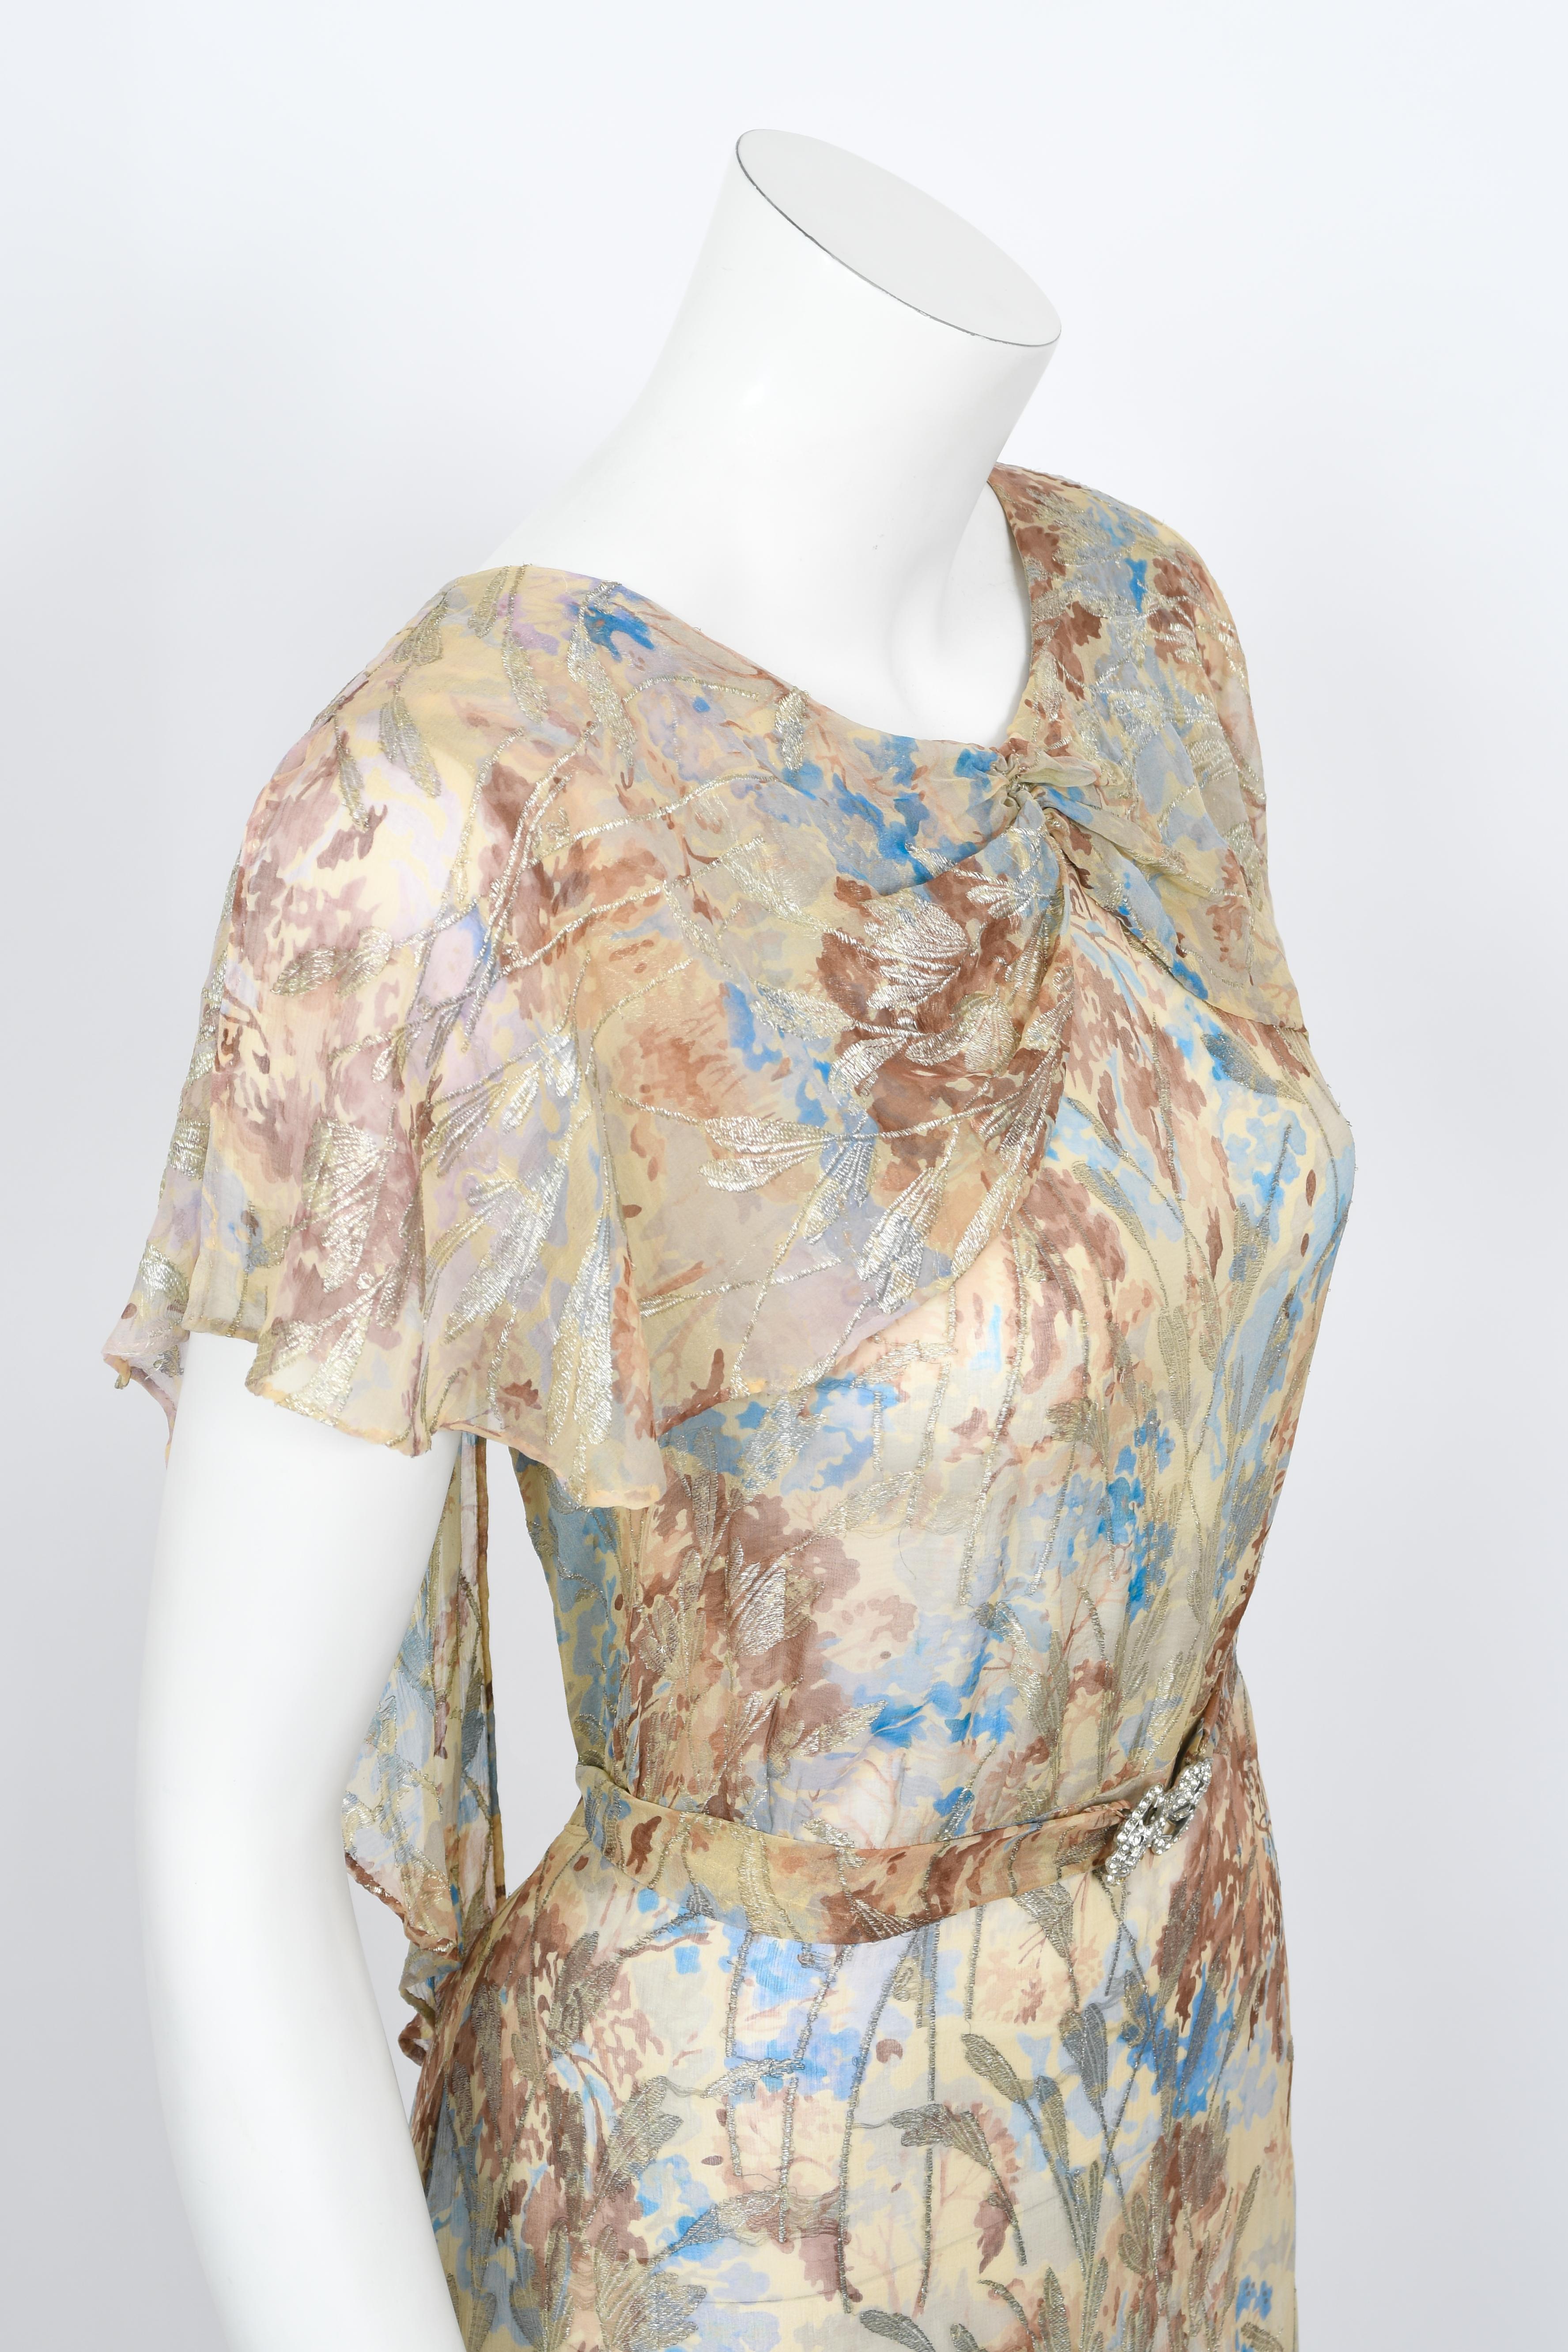 Vintage 1930's Metallic Floral Semi-Sheer Lamé Silk Capelet Drape Belted Gown For Sale 4